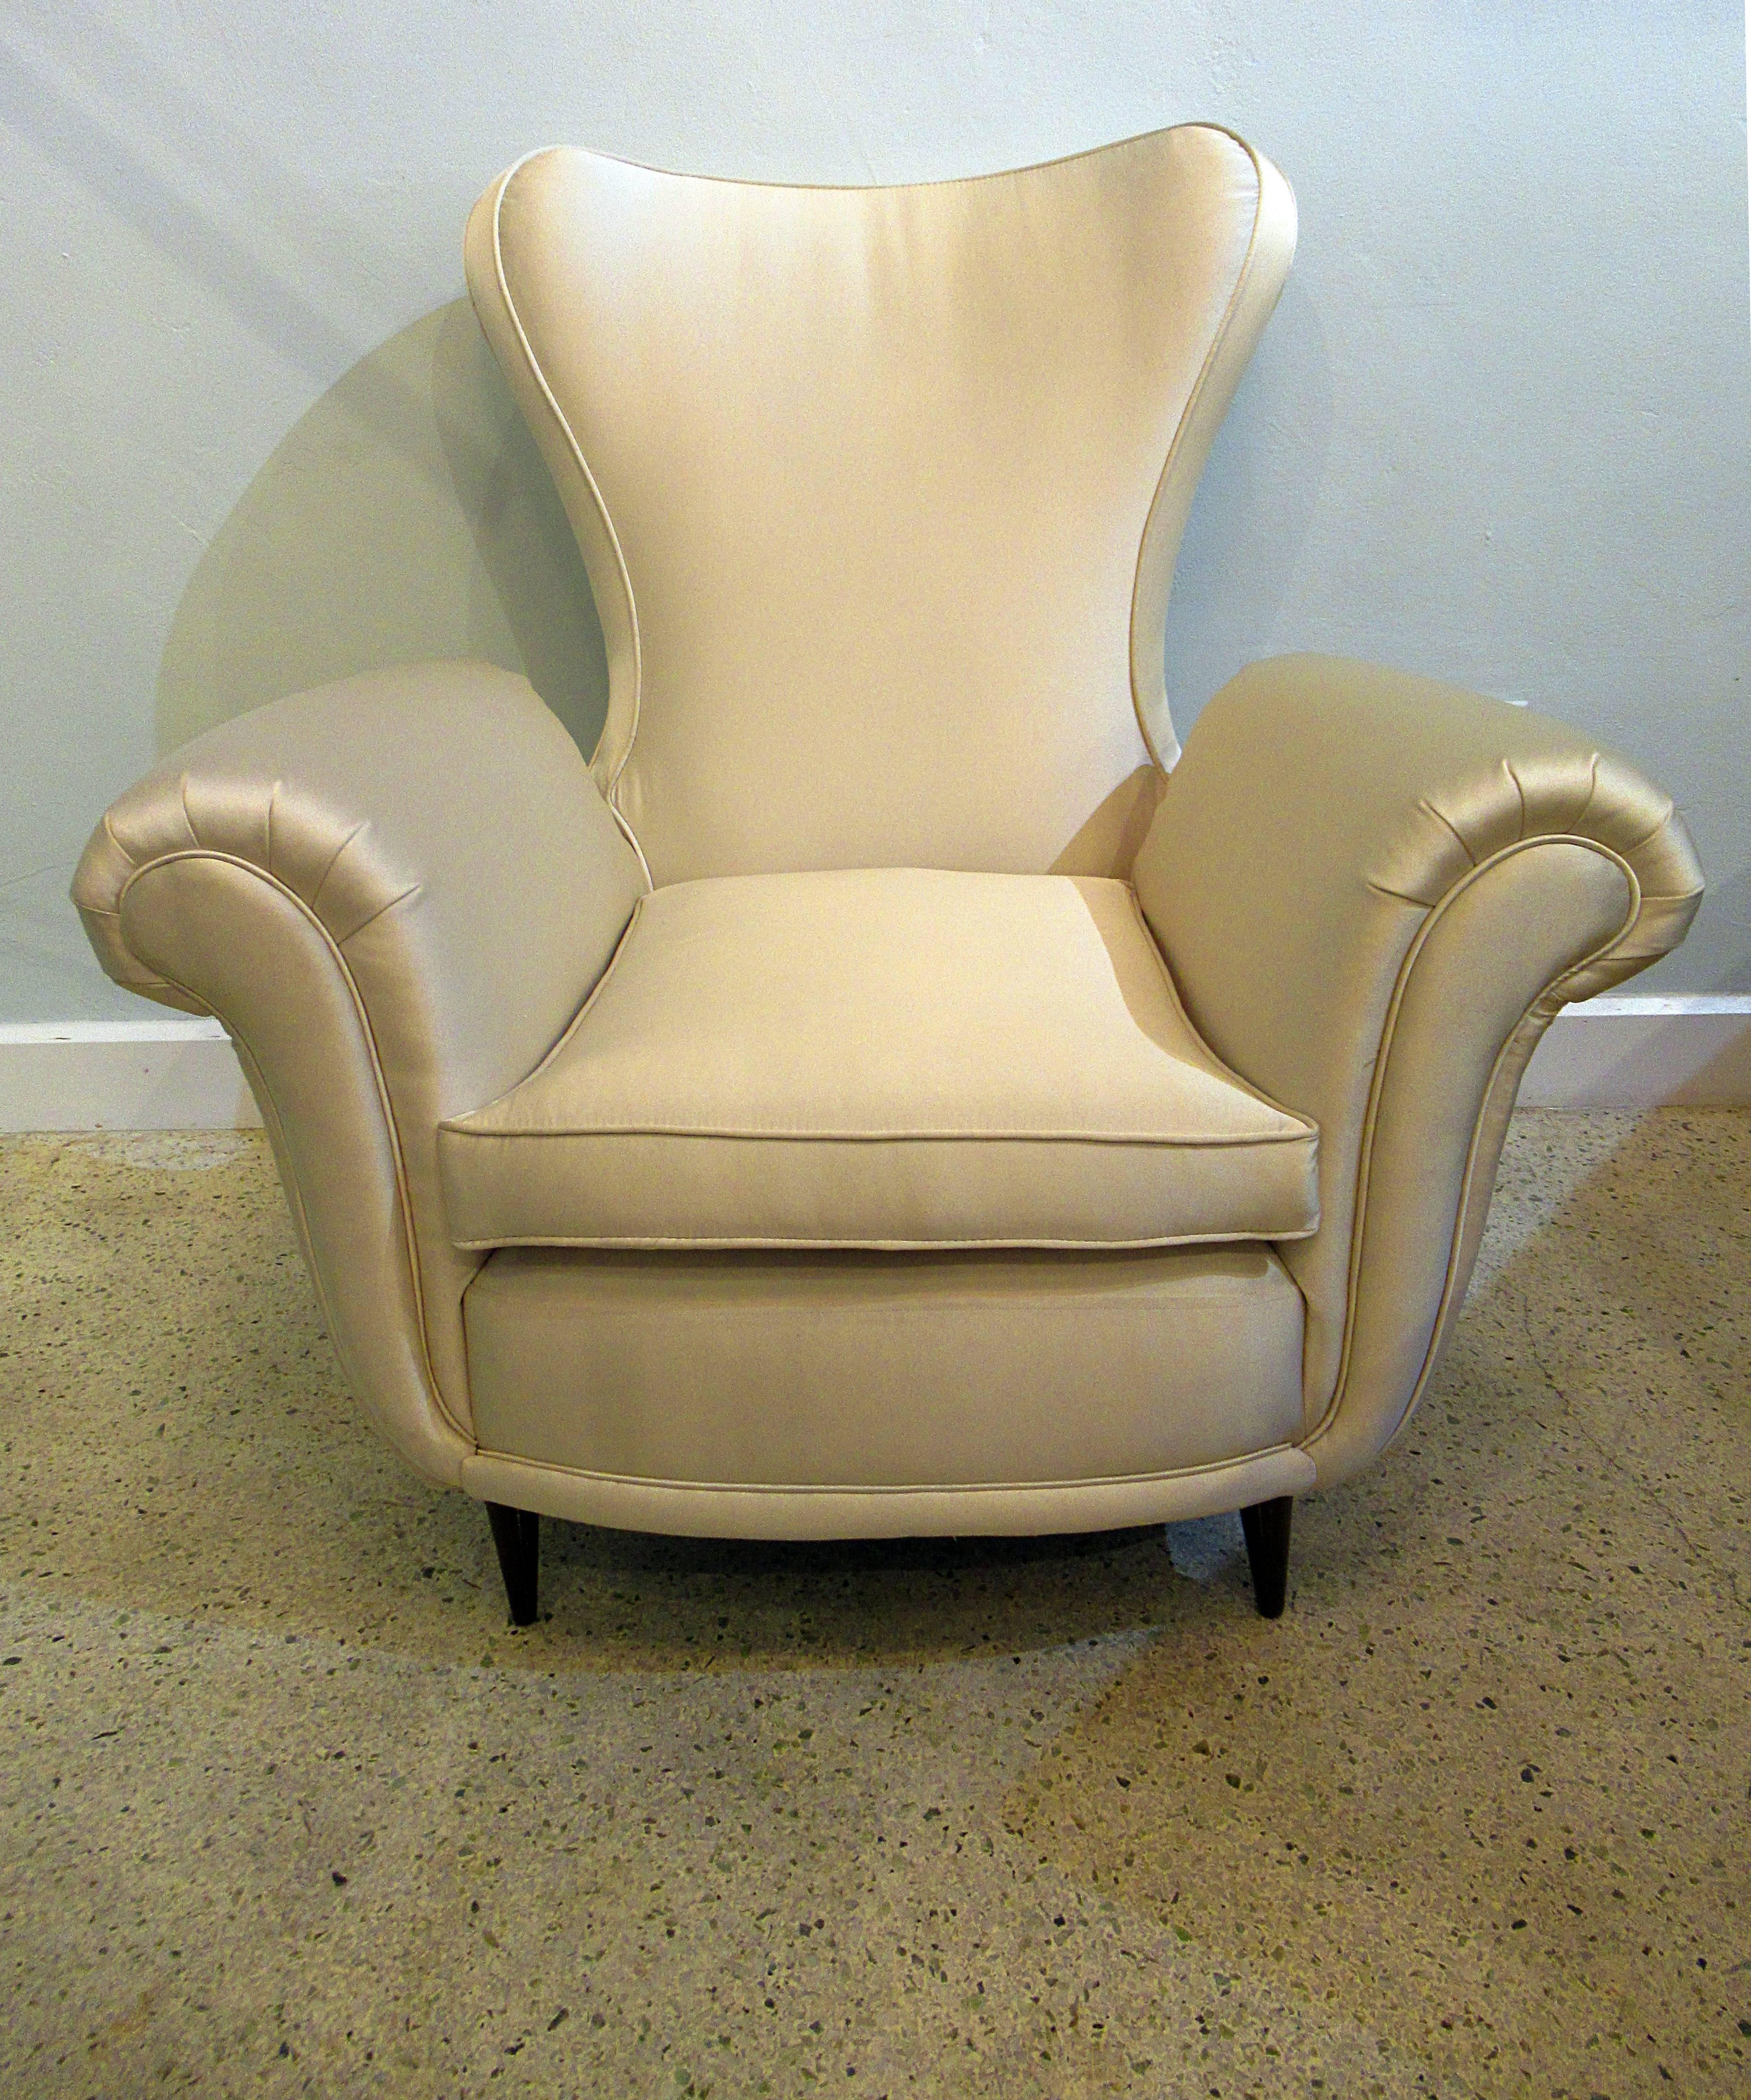 Italian Modern Upholstered Scrolled Arm Occasional Chair, Paolo Buffa, 1950's For Sale 6